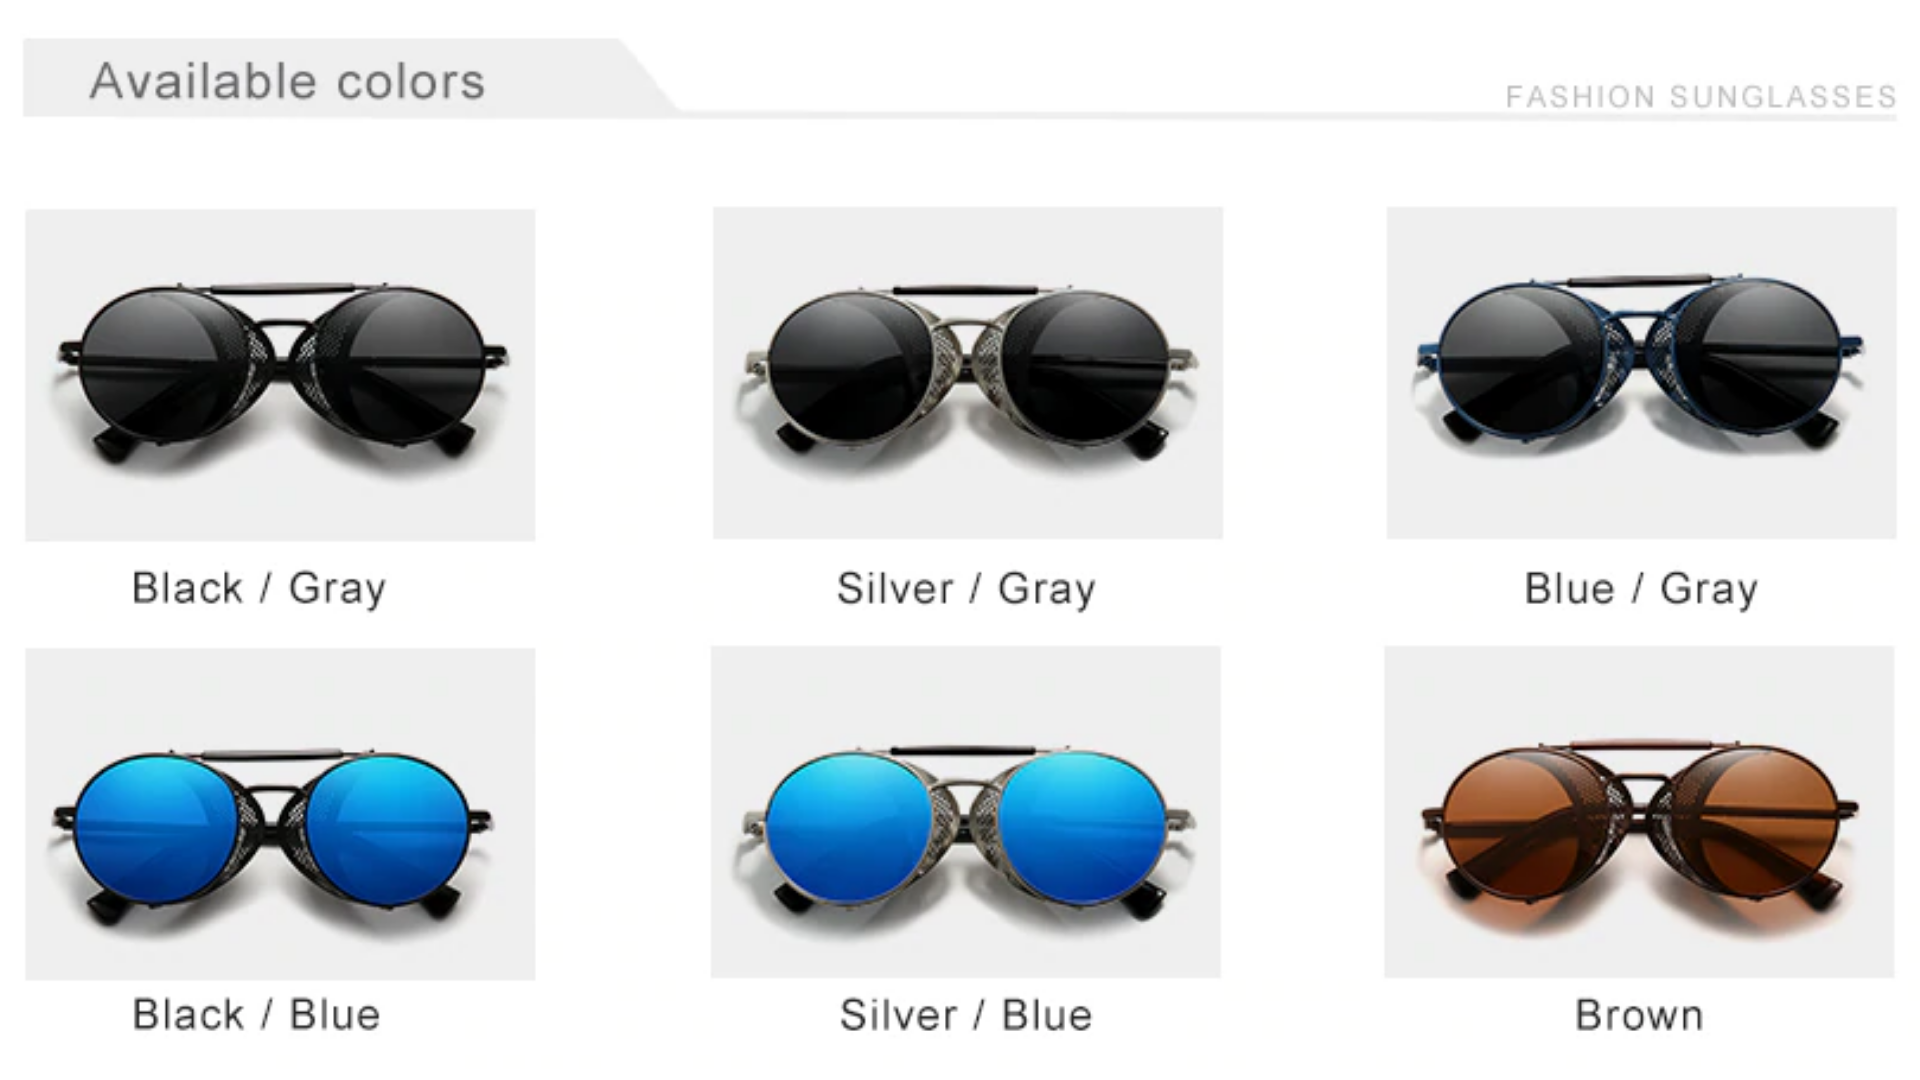 KINGSEVEN® STEAMPUNK Sunglasses N7550 Available colors